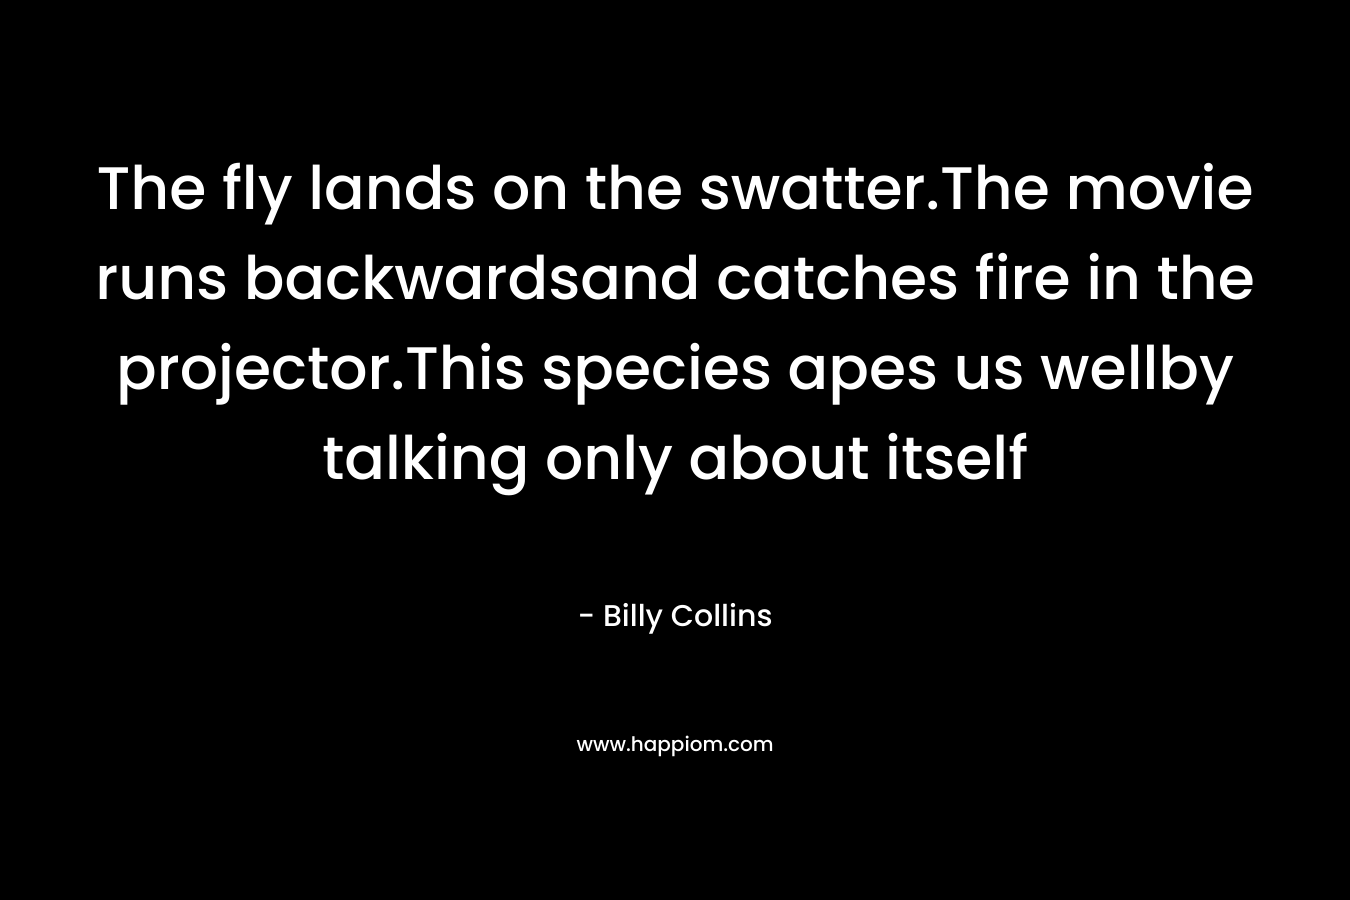 The fly lands on the swatter.The movie runs backwardsand catches fire in the projector.This species apes us wellby talking only about itself – Billy Collins